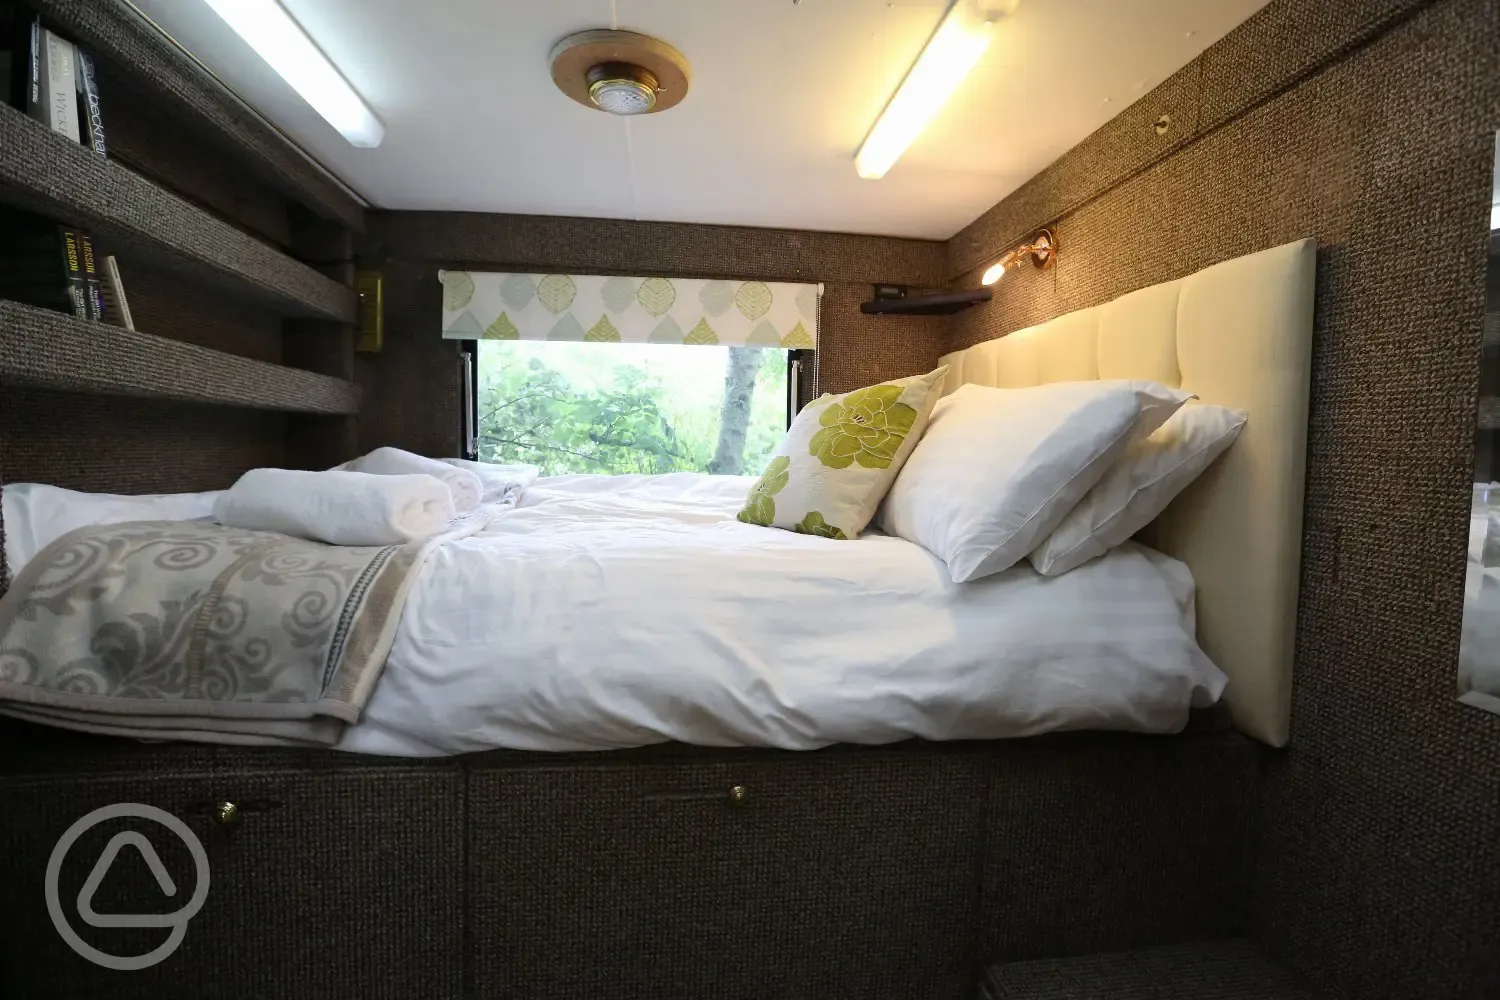 Glamping bed